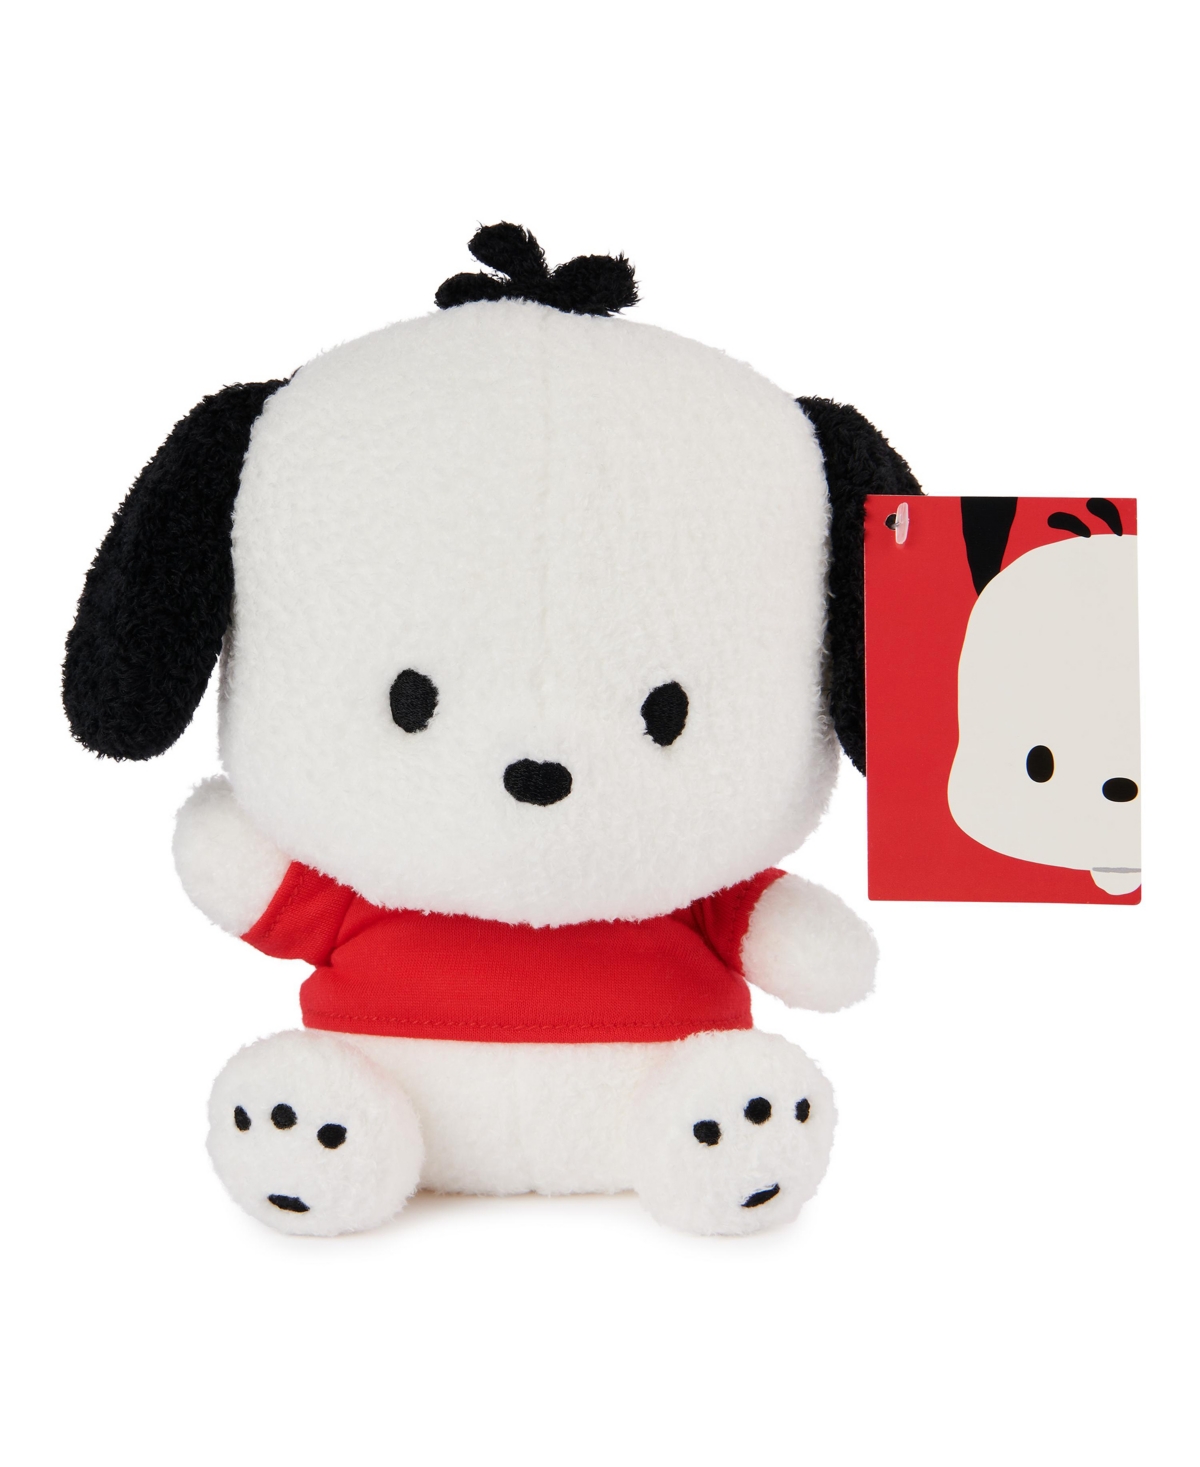 Hello Kitty Gund Sanrio Pochacco Plush, Puppy Stuffed Animal, For Ages 3 And Up, 6" In Multi-color